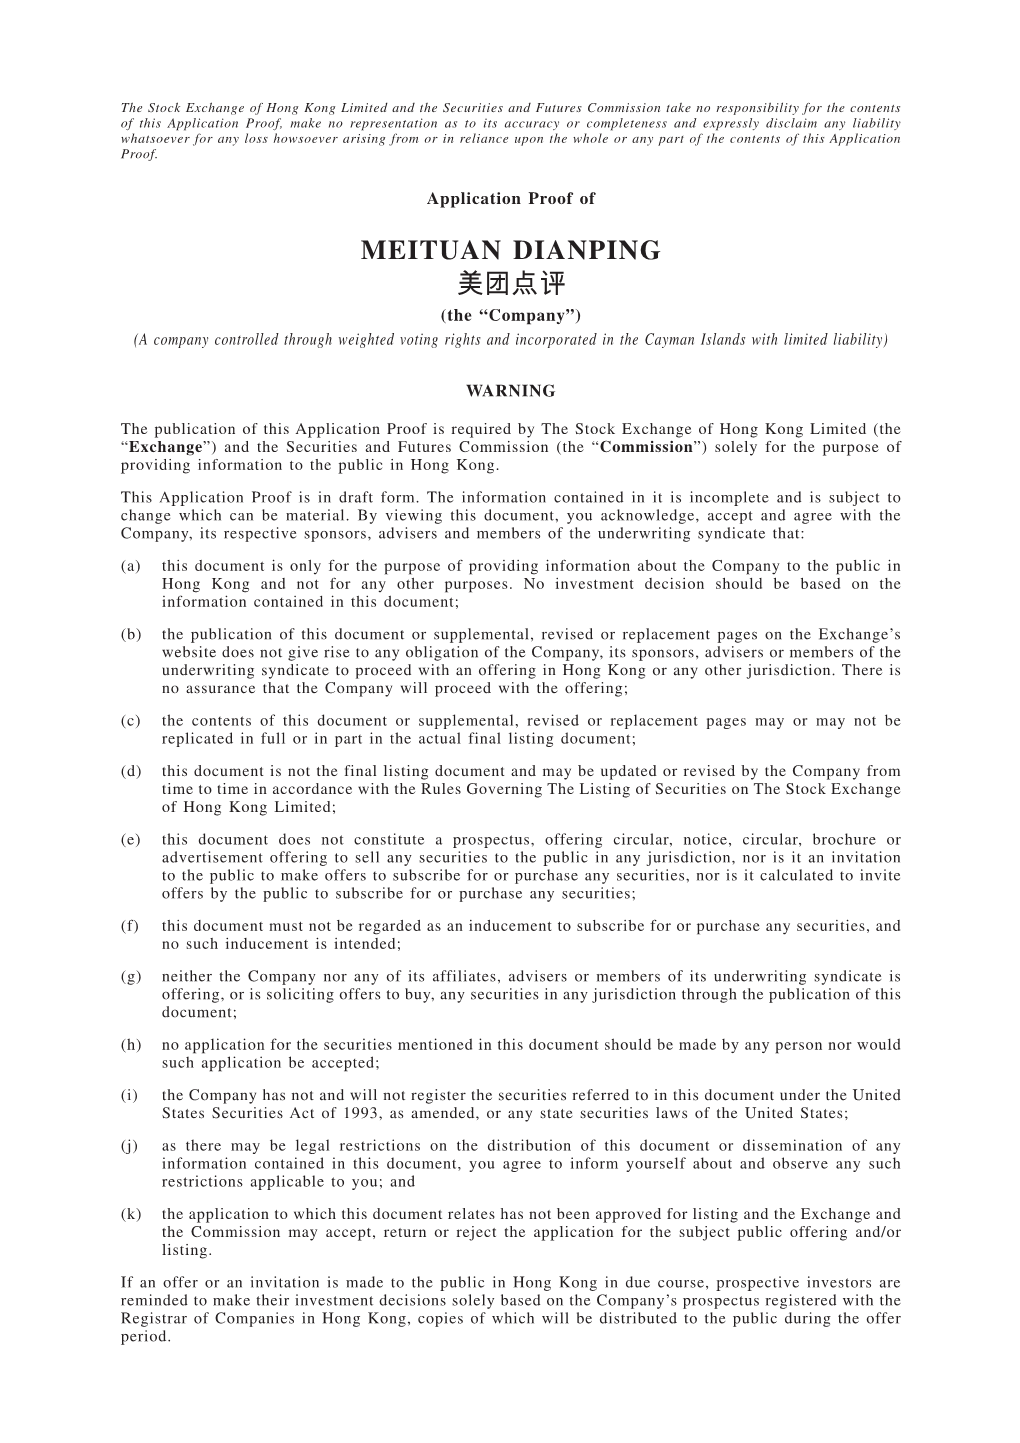 MEITUAN DIANPING 美團點評 (The “Company”) (A Company Controlled Through Weighted Voting Rights and Incorporated in the Cayman Islands with Limited Liability)